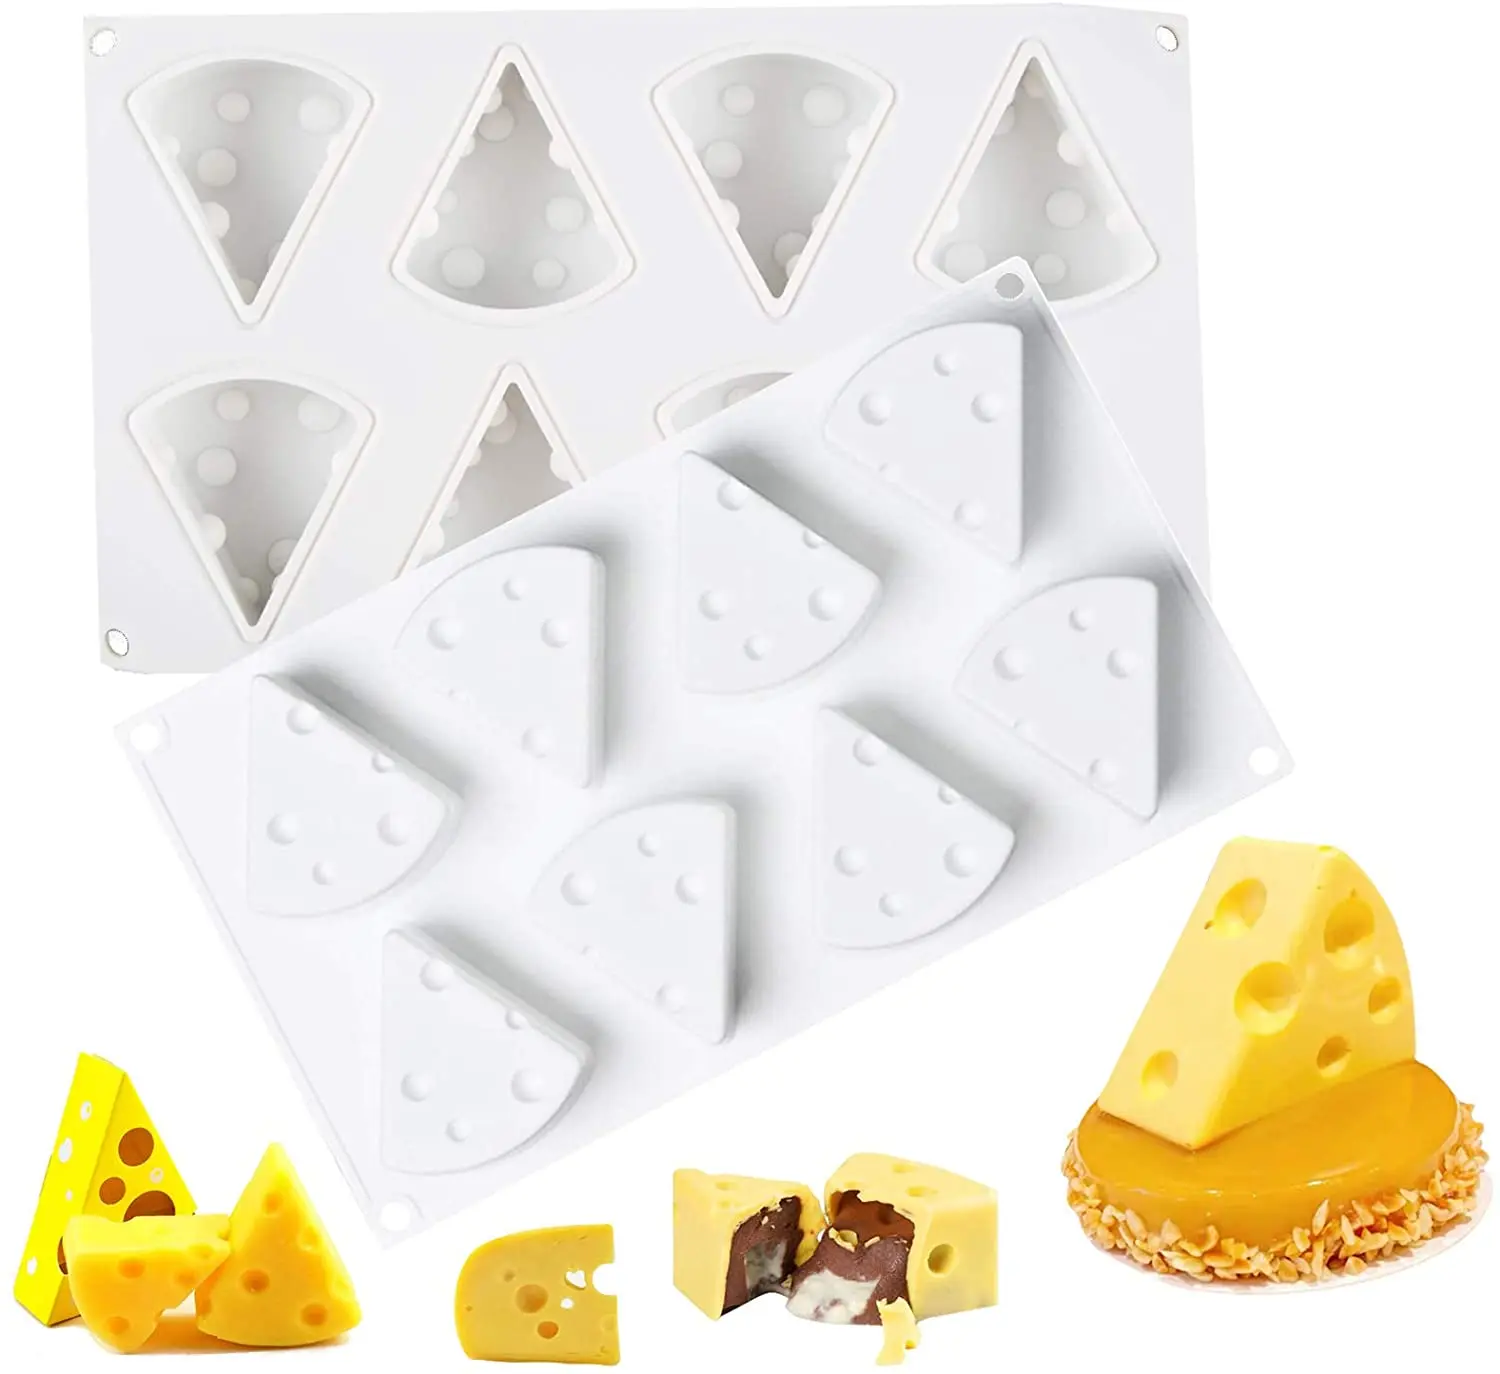 

Cheese Shape Silicone candle Mold Scented Mousse Cake Moulds soap mold Chocolate Fondant Pastry Baking Decorating Tools Bakeware